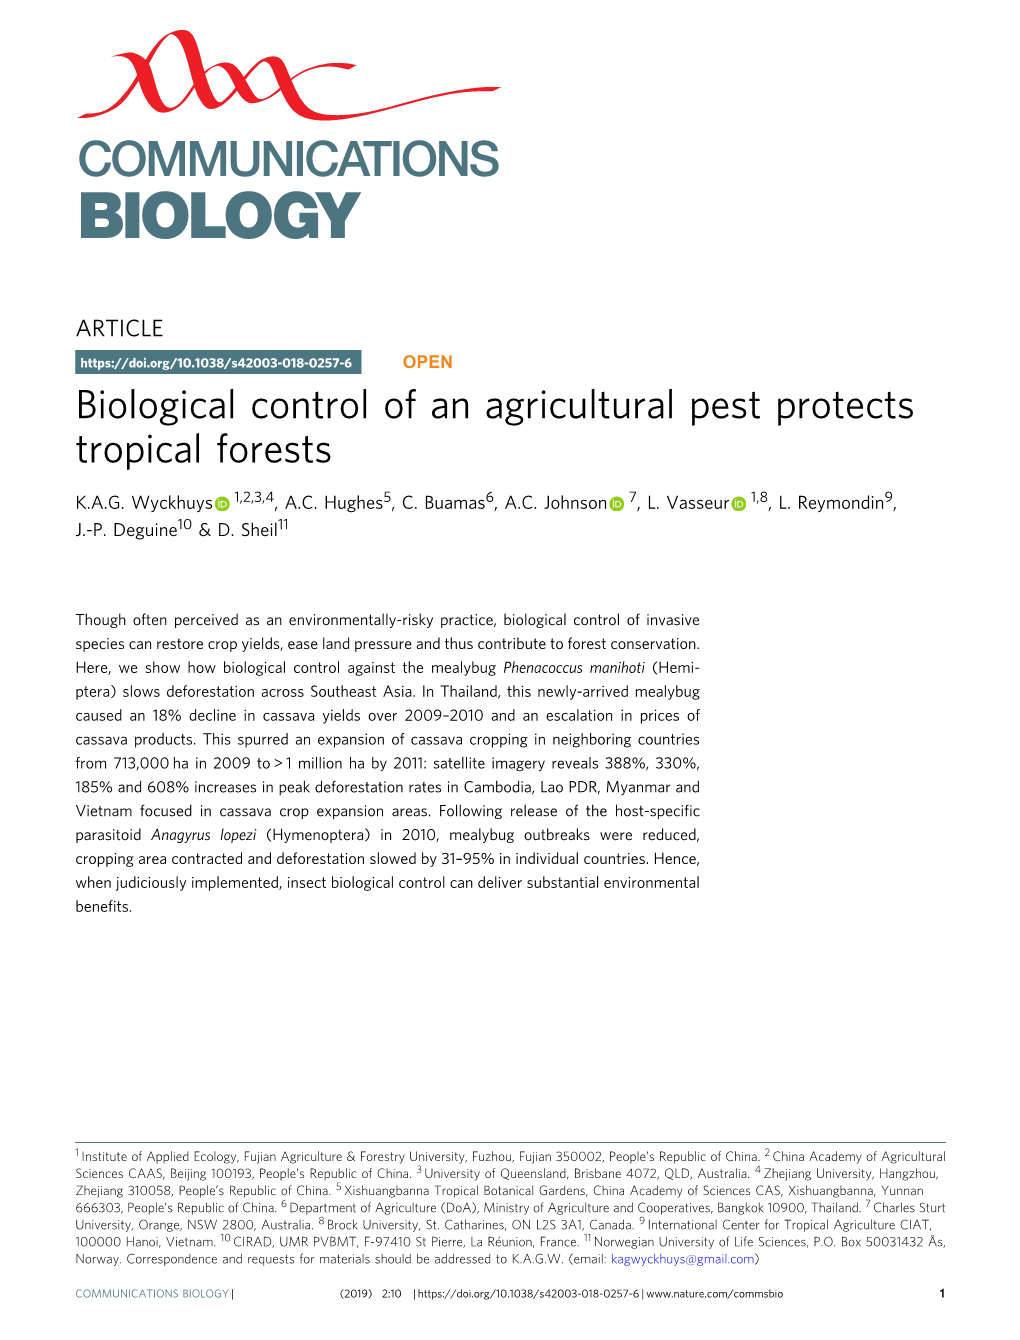 Biological Control of an Agricultural Pest Protects Tropical Forests